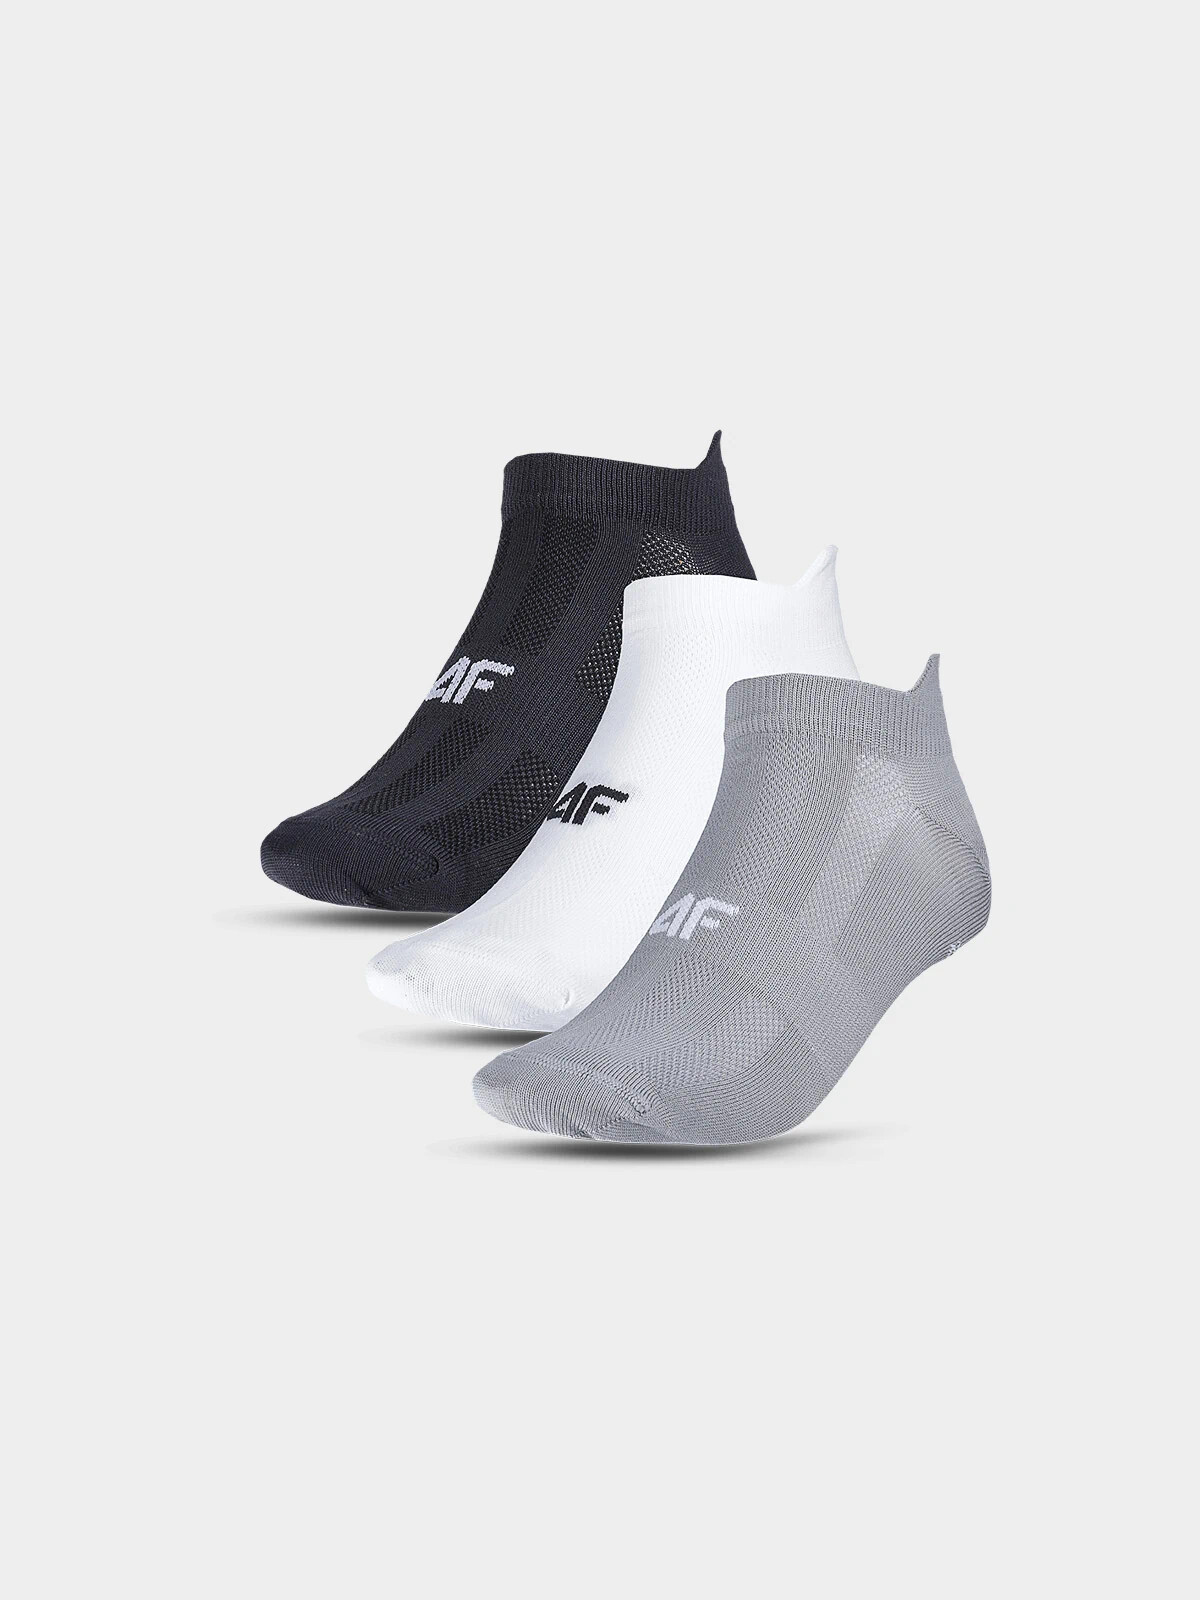 Men's Sports Socks Under the Ankle (3pack) 4F - Multicolored